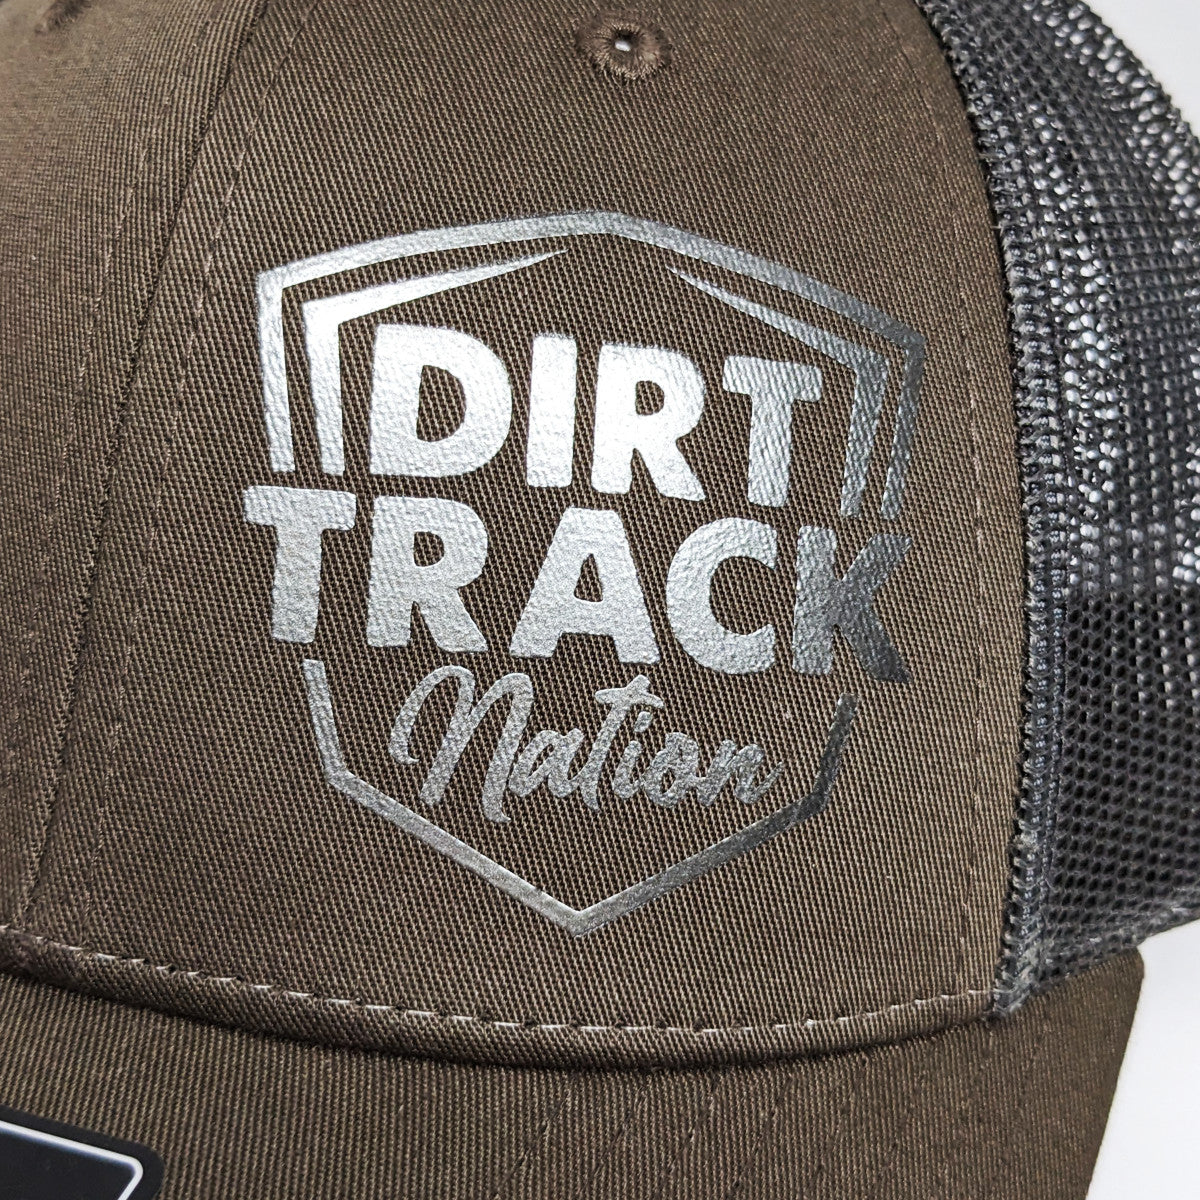 Dirt Track Nation Chocolate W/ Gray Brown Mesh Hat